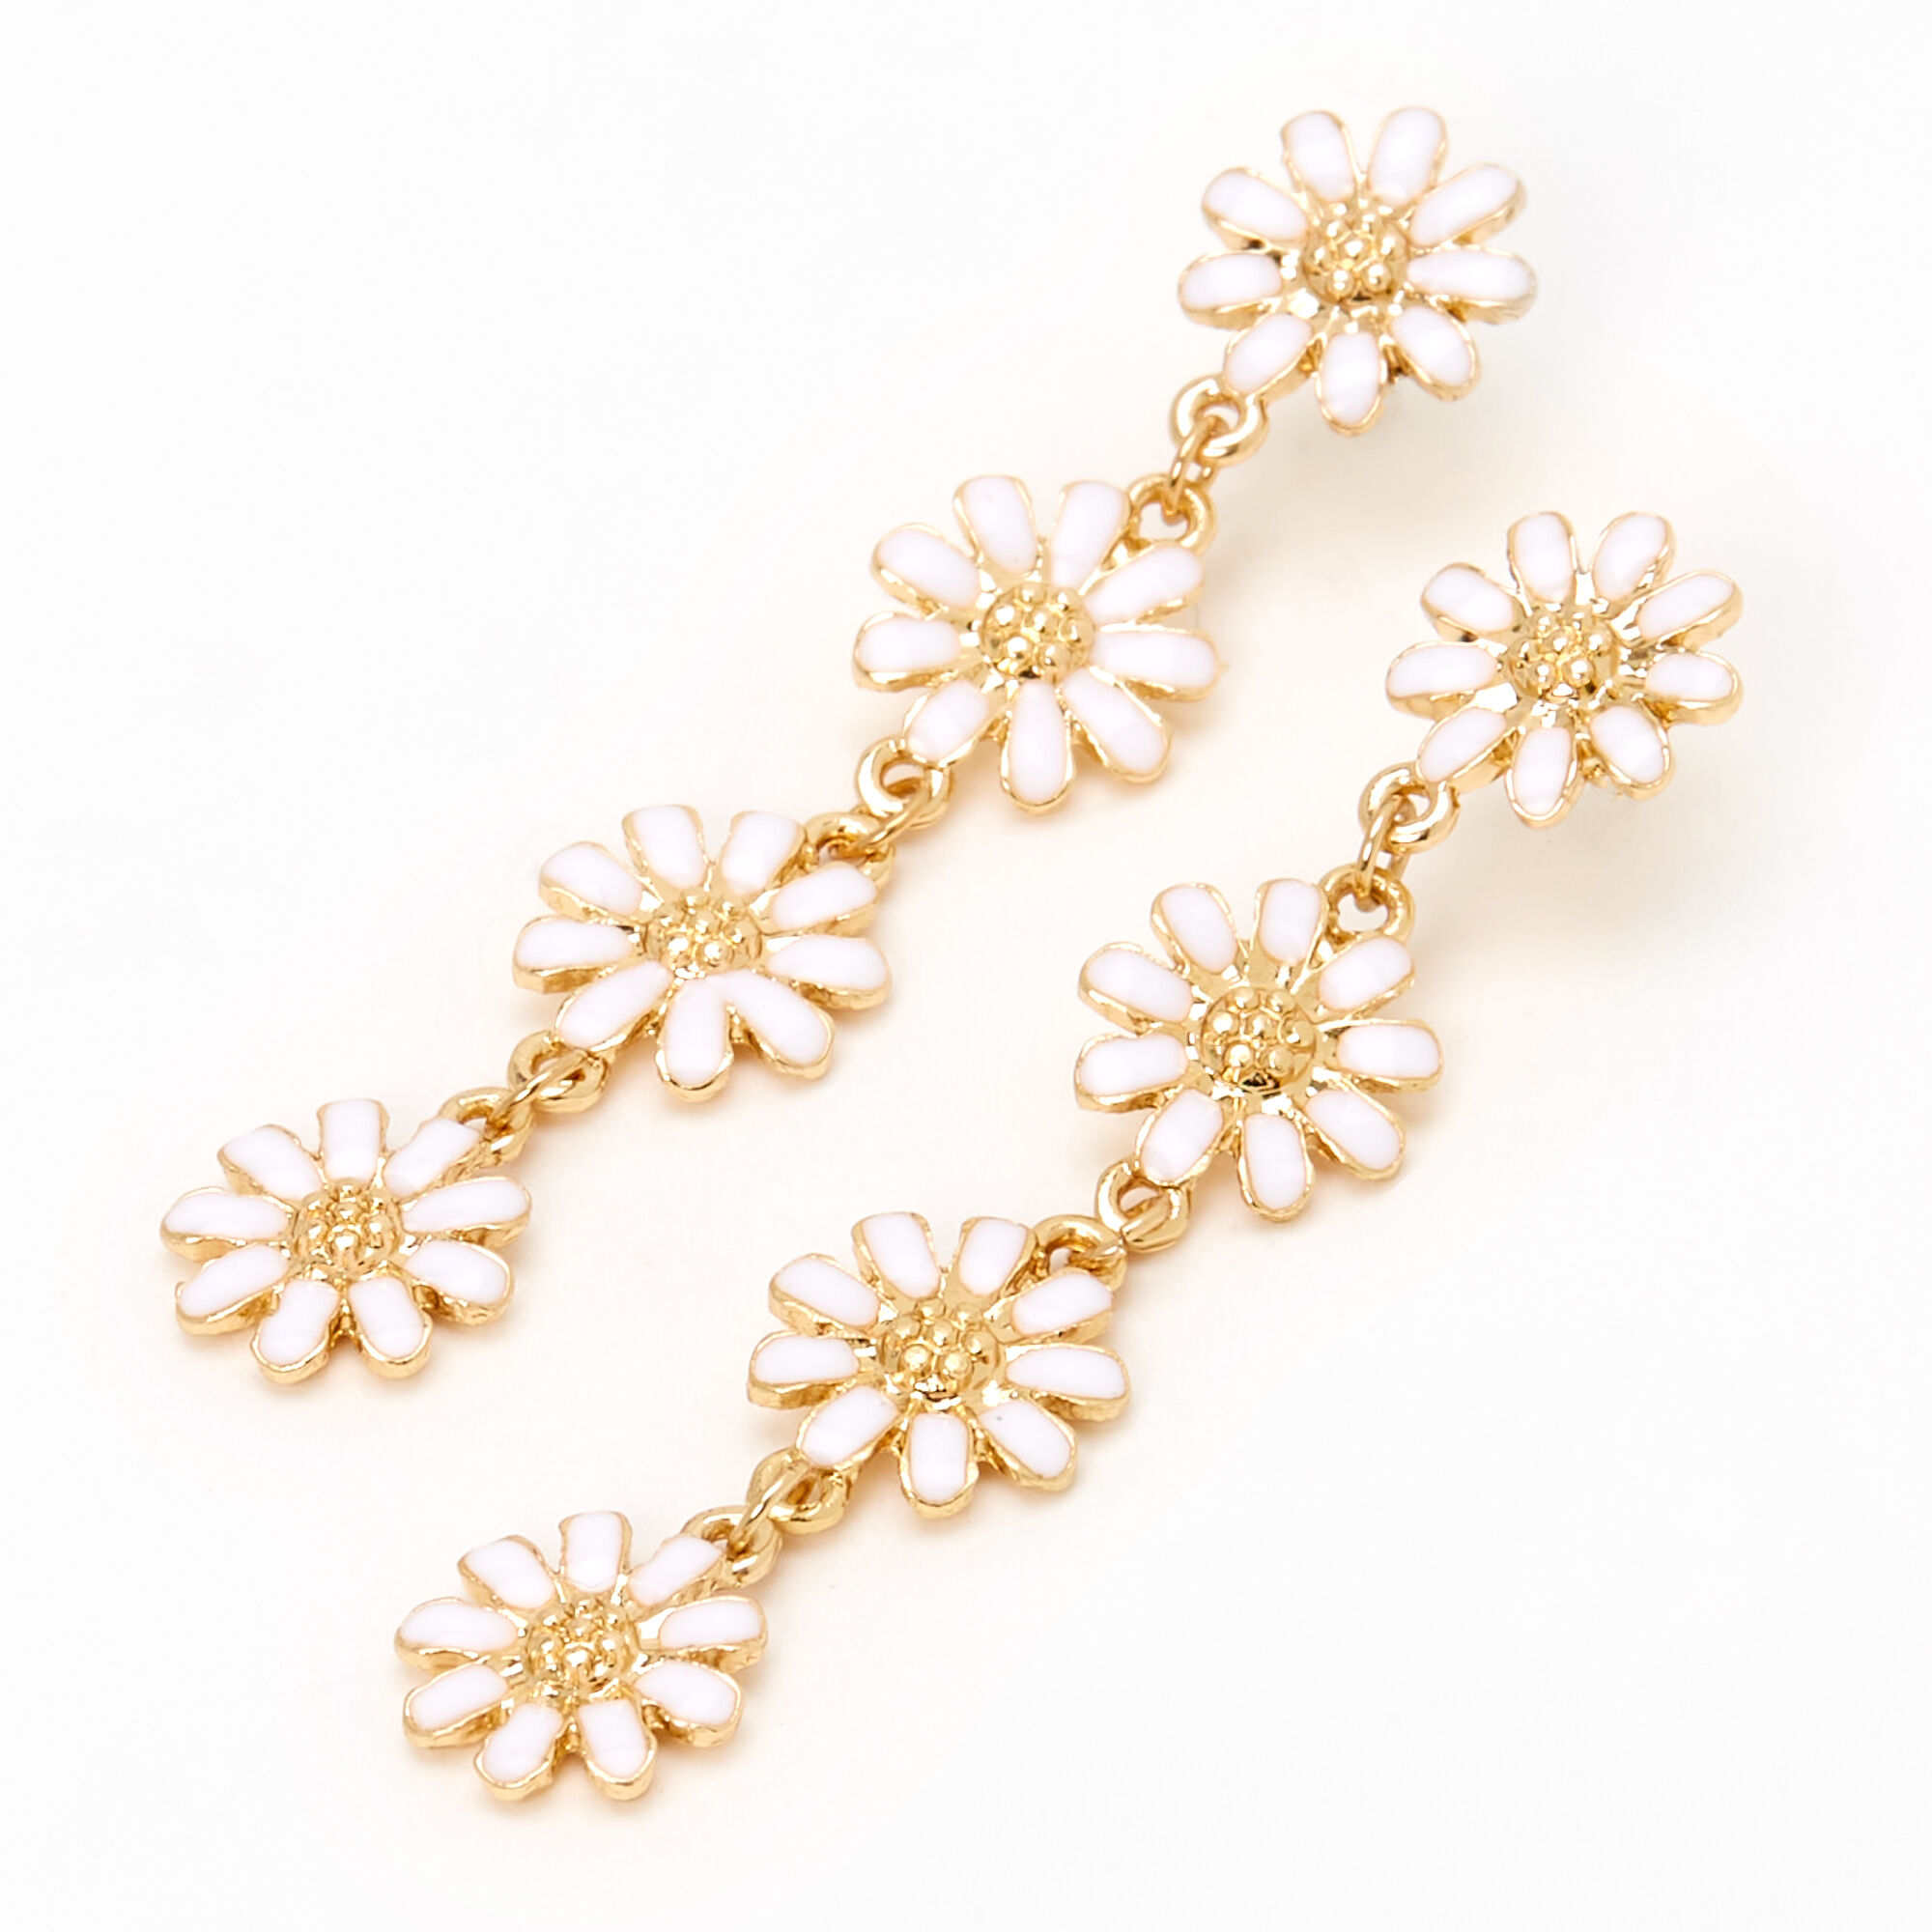 View Claires Gold 2 Daisy Flower Linear Drop Earrings White information